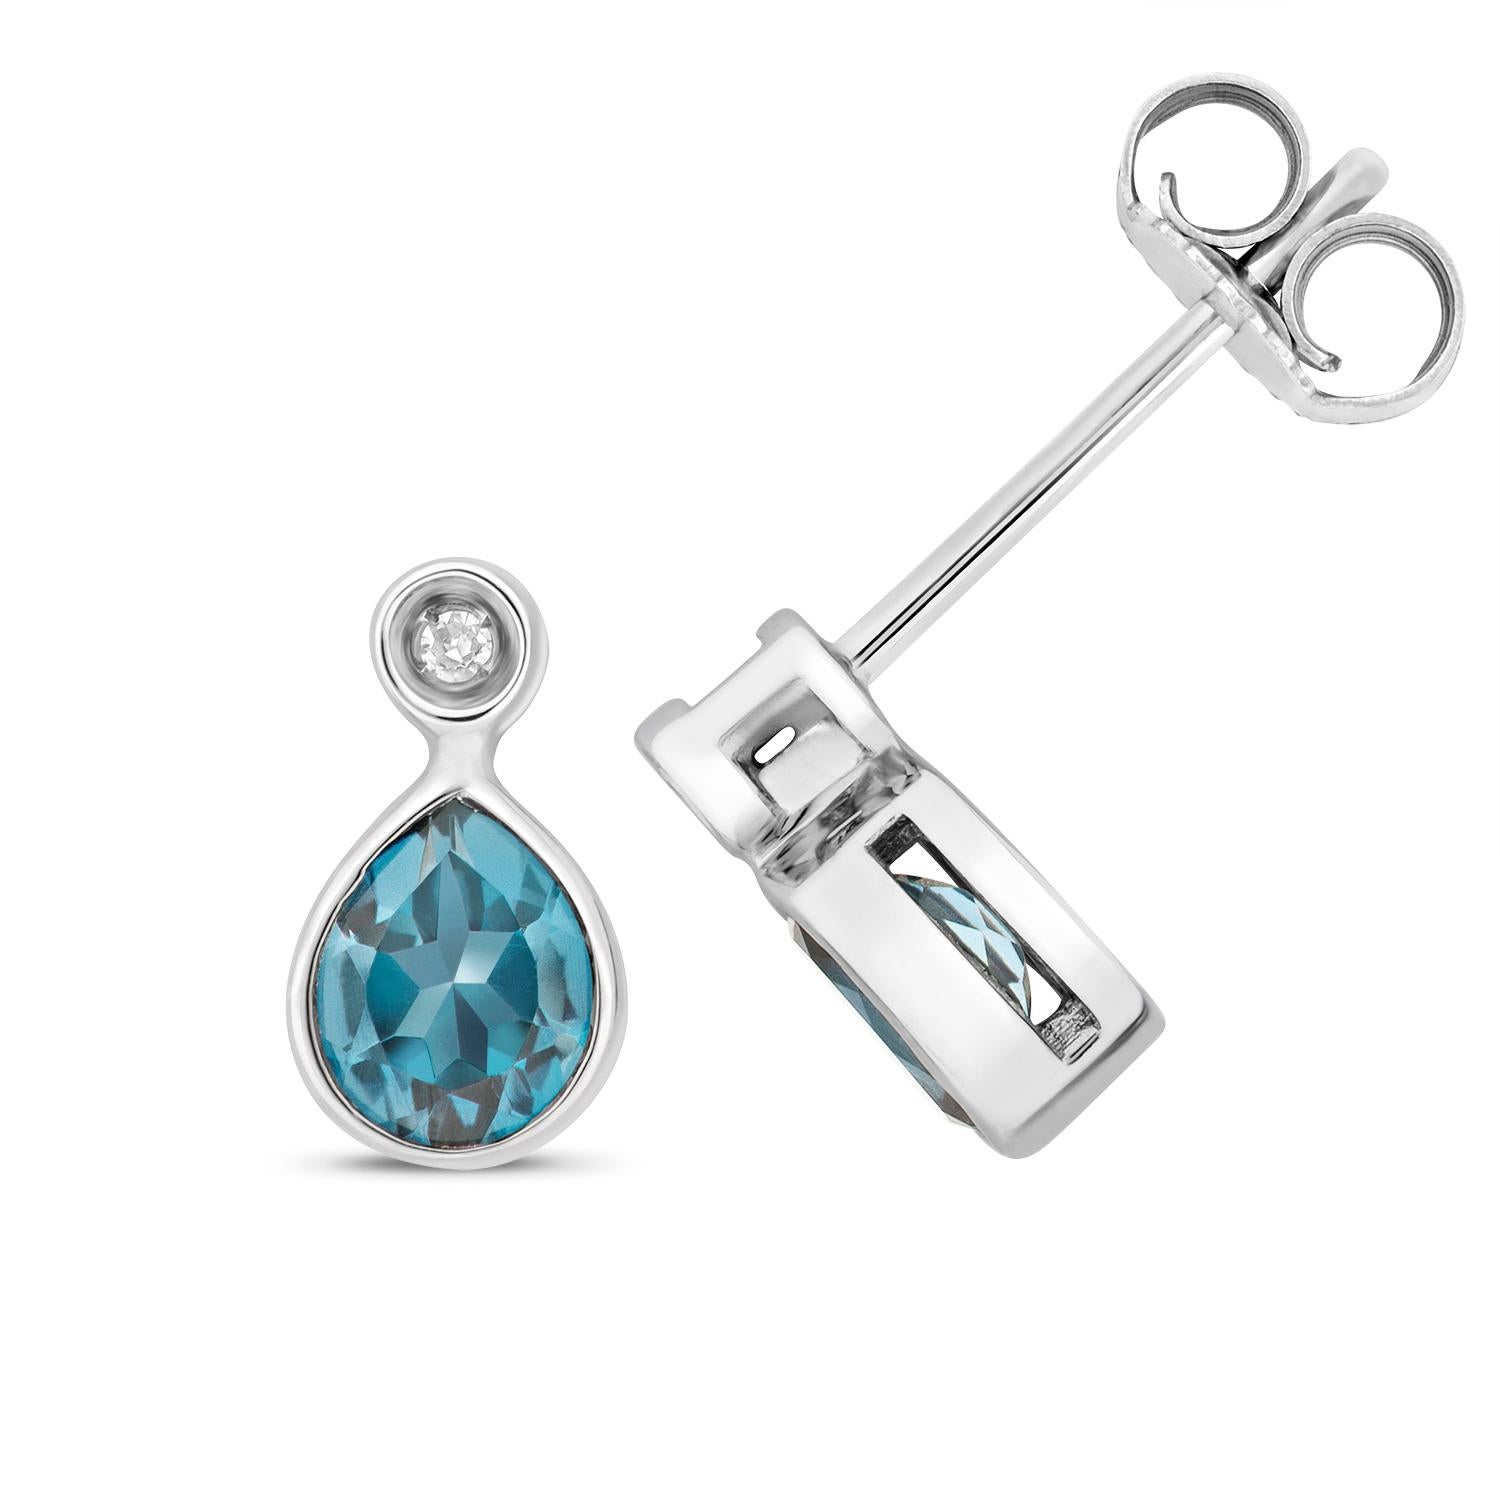 DIAMOND AND LONDON BLUE TOPAZ STUDS

9CT W/G 2SC/0.01CT 2LBT/5X4MM PR

Weight: 1.35g

Number Of Stones:2+2

Total Carates:0.770+0.010